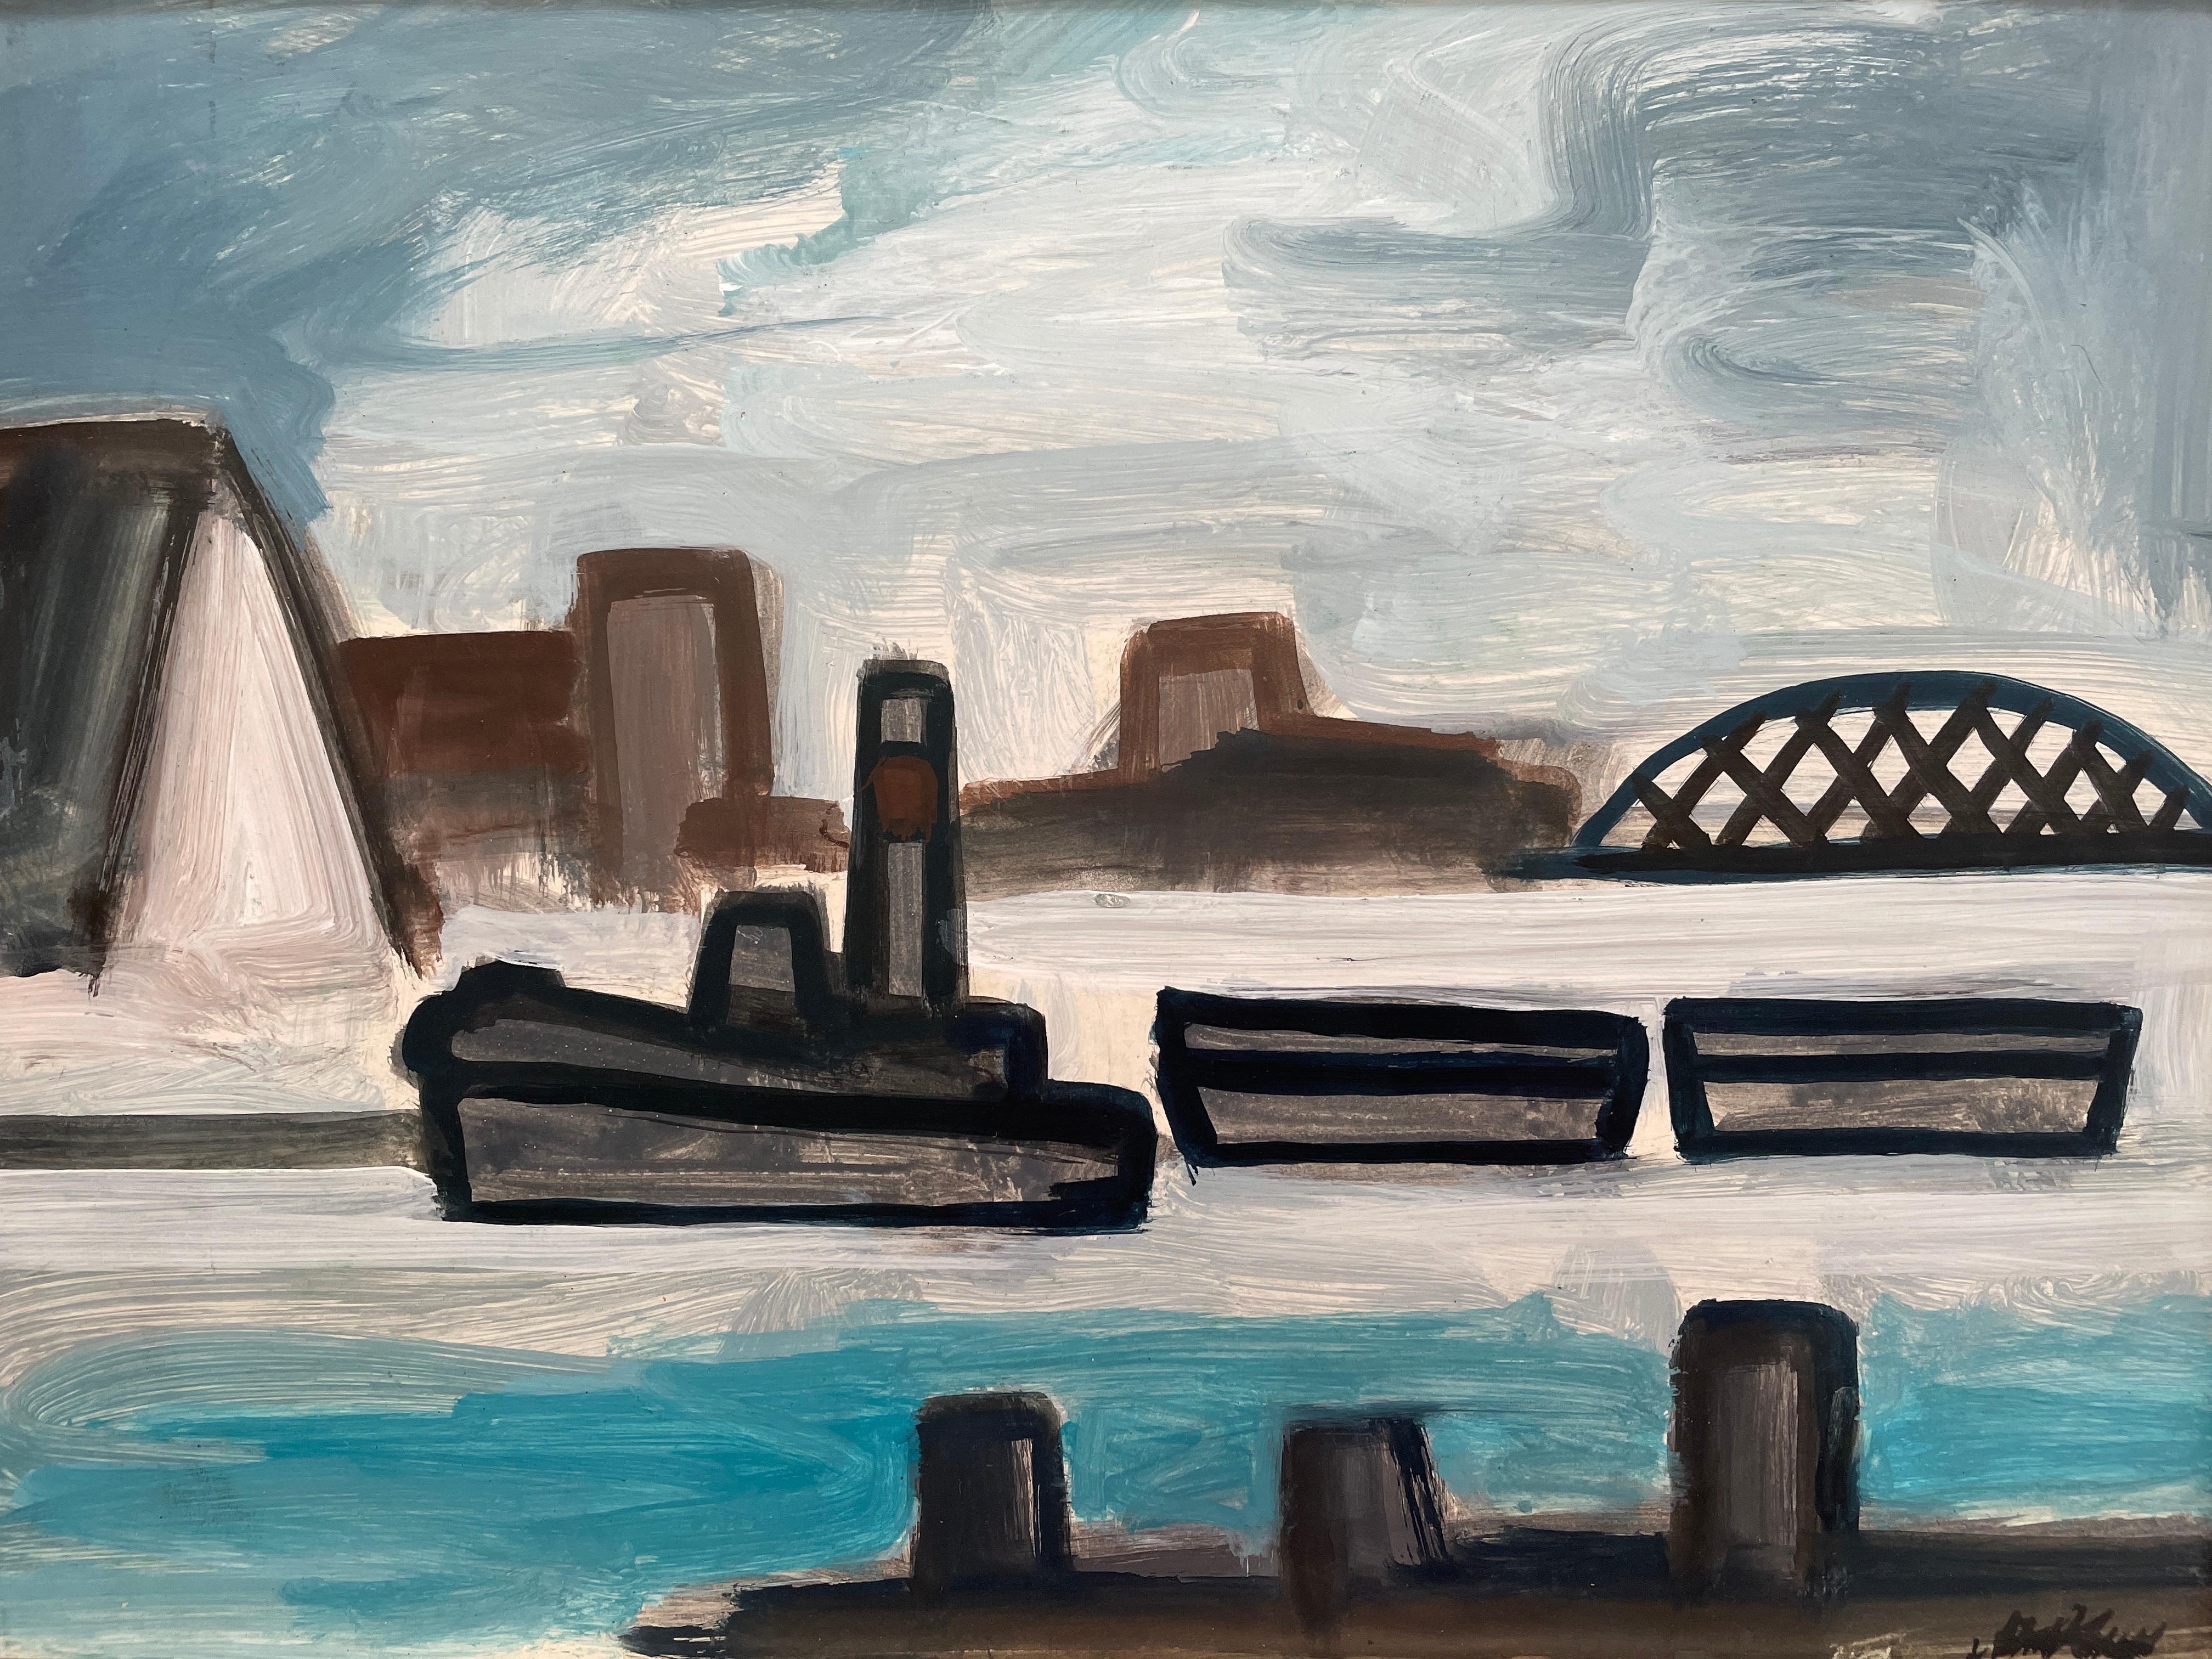 Tugboat on a river with bridge and buildings. Title - Tugboat on the River - Painting by Markey Robinson